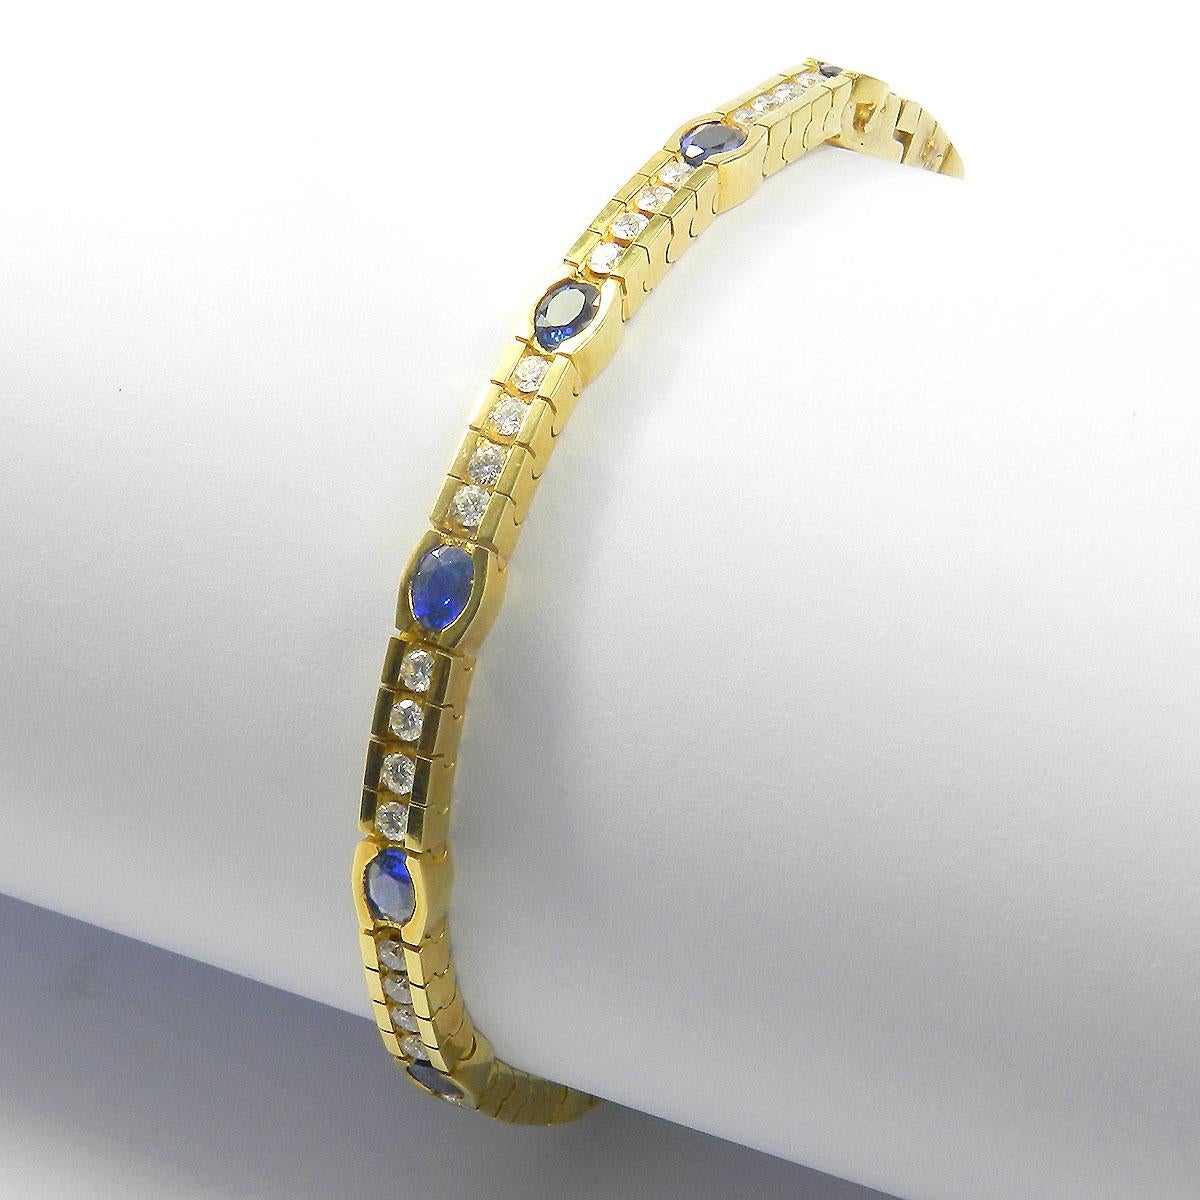 Sapphire and 1.2 Carat Diamond 18K Gold Tennis Bracelet

This sporty, elegant Tennis bracelet is alternately set with 12 sapphires weighing approx. 3.4 ct and 48 brilliant-cut diamonds weighing 1.2 ct. The link elements are mounted movable in a